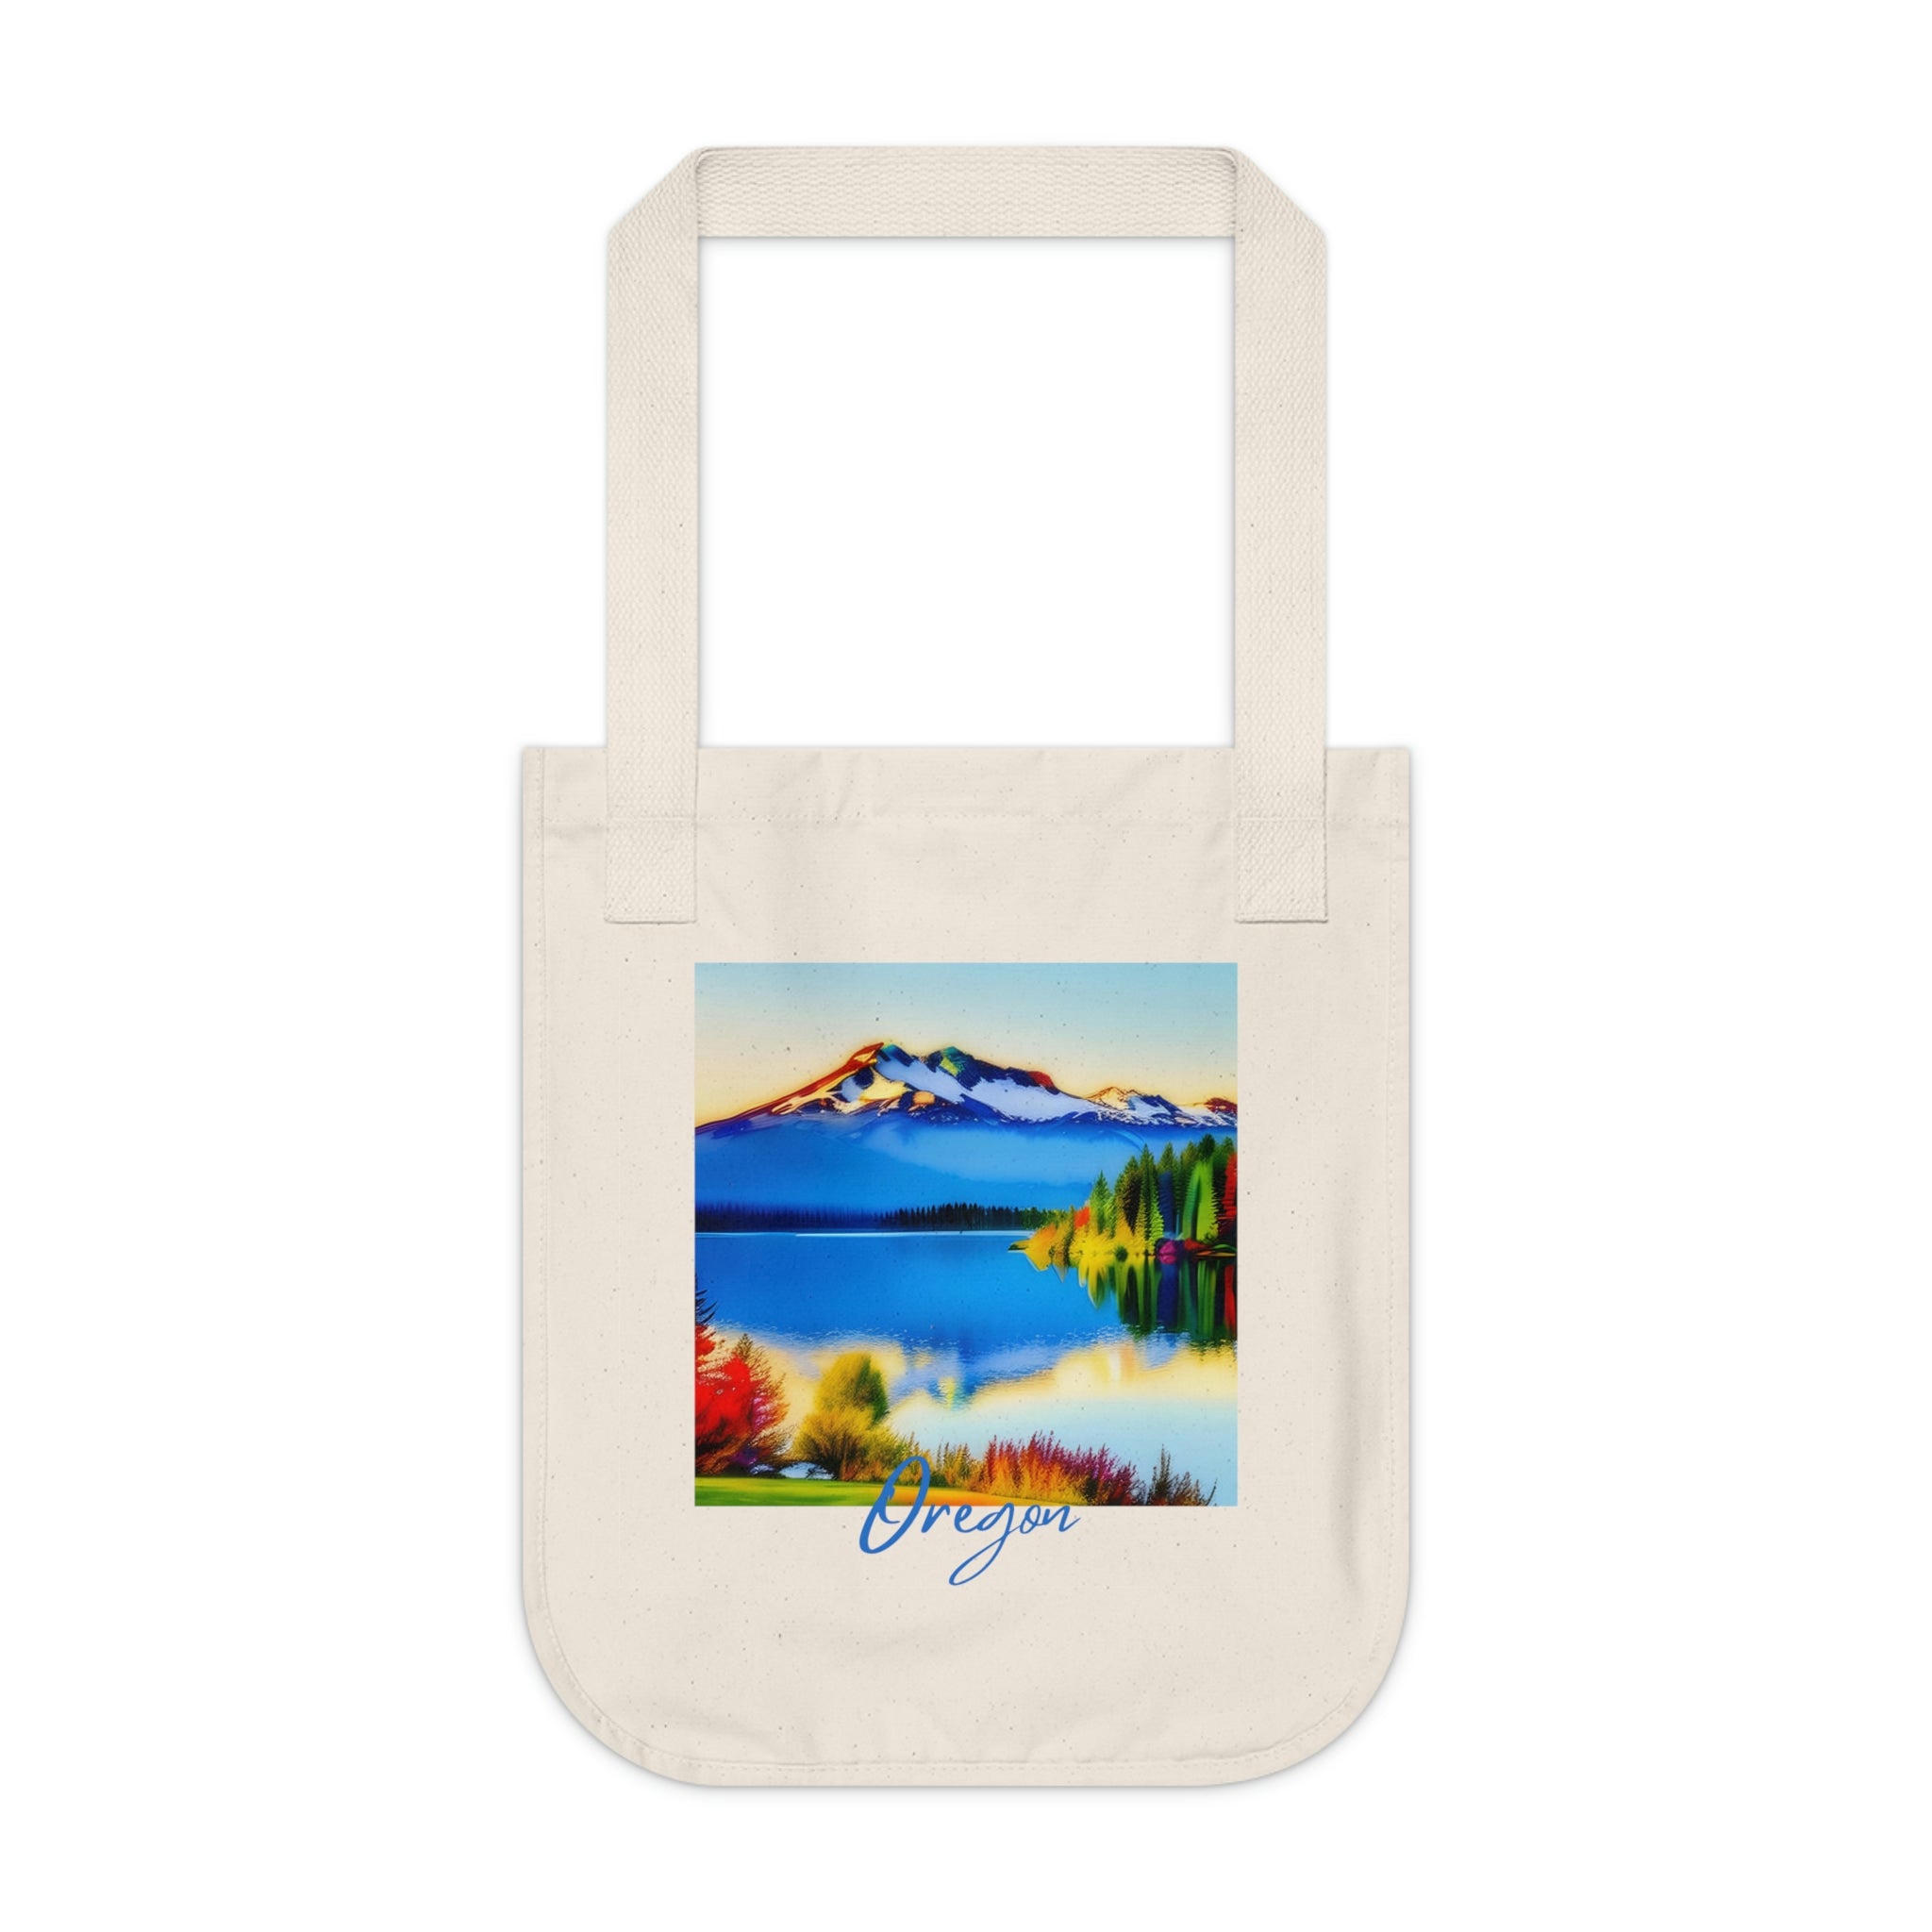 Farmers Market Tote Bag - Corn – Underground Printing Online Stores